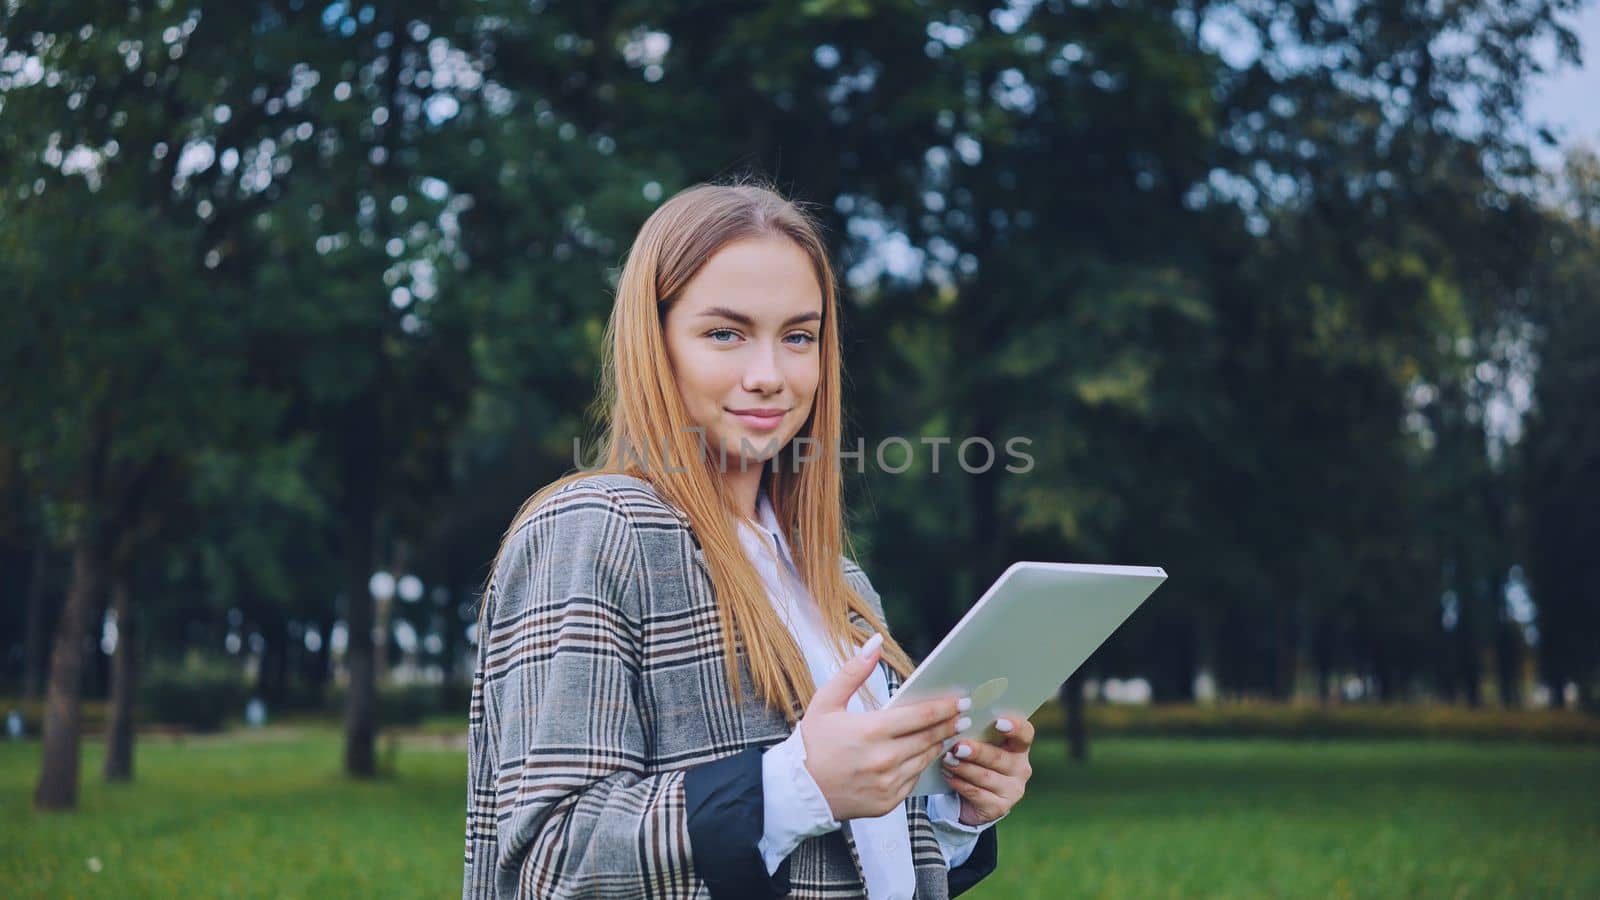 A young girl walks with a tablet in the park